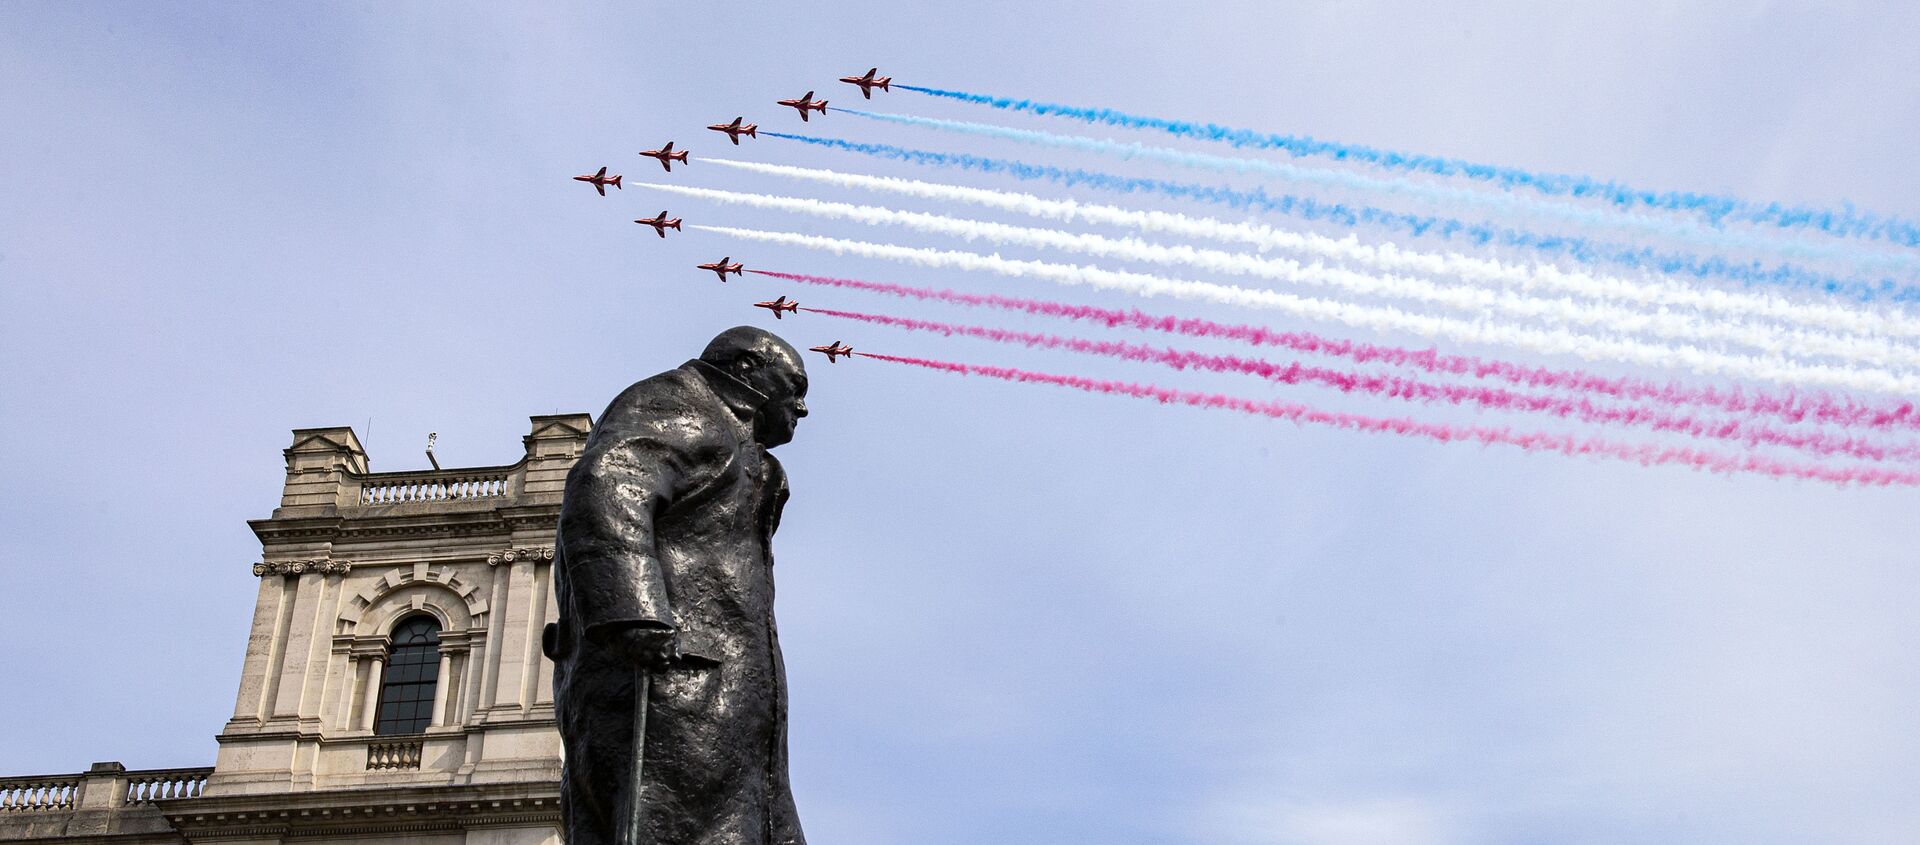 In a handout picture released by the British Ministry of Defence (MOD) on May 8, 2020, the Royal Air Force Red Arrows fly over the statue of Sir Winston Churchill to mark the 75th anniversary of VE Day (Victory in Europe Day), the end of the Second World War in Europe, in central London - Sputnik International, 1920, 03.06.2020